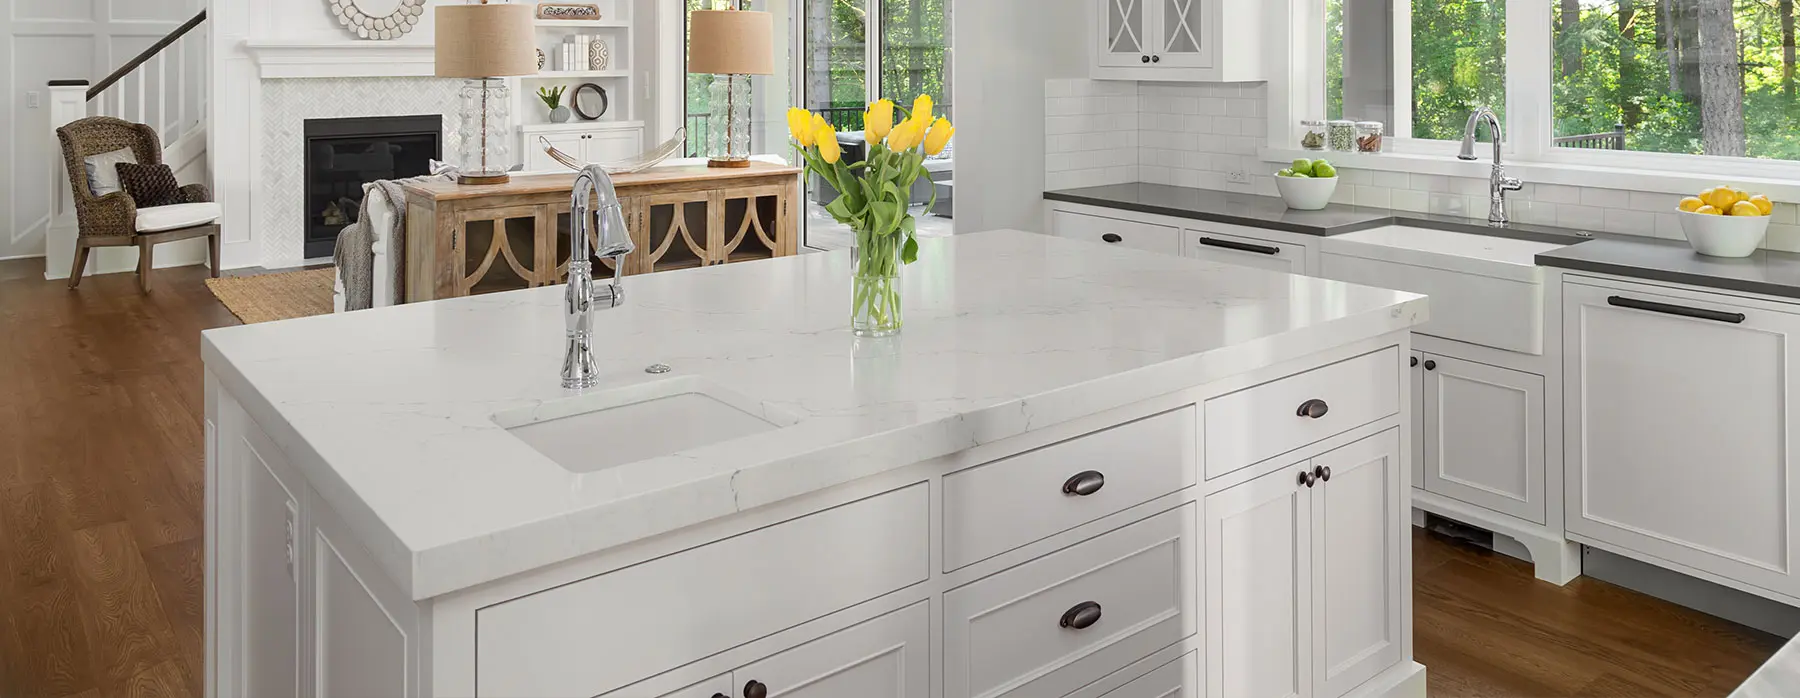 7 Things To Consider When Buying Granite Countertops